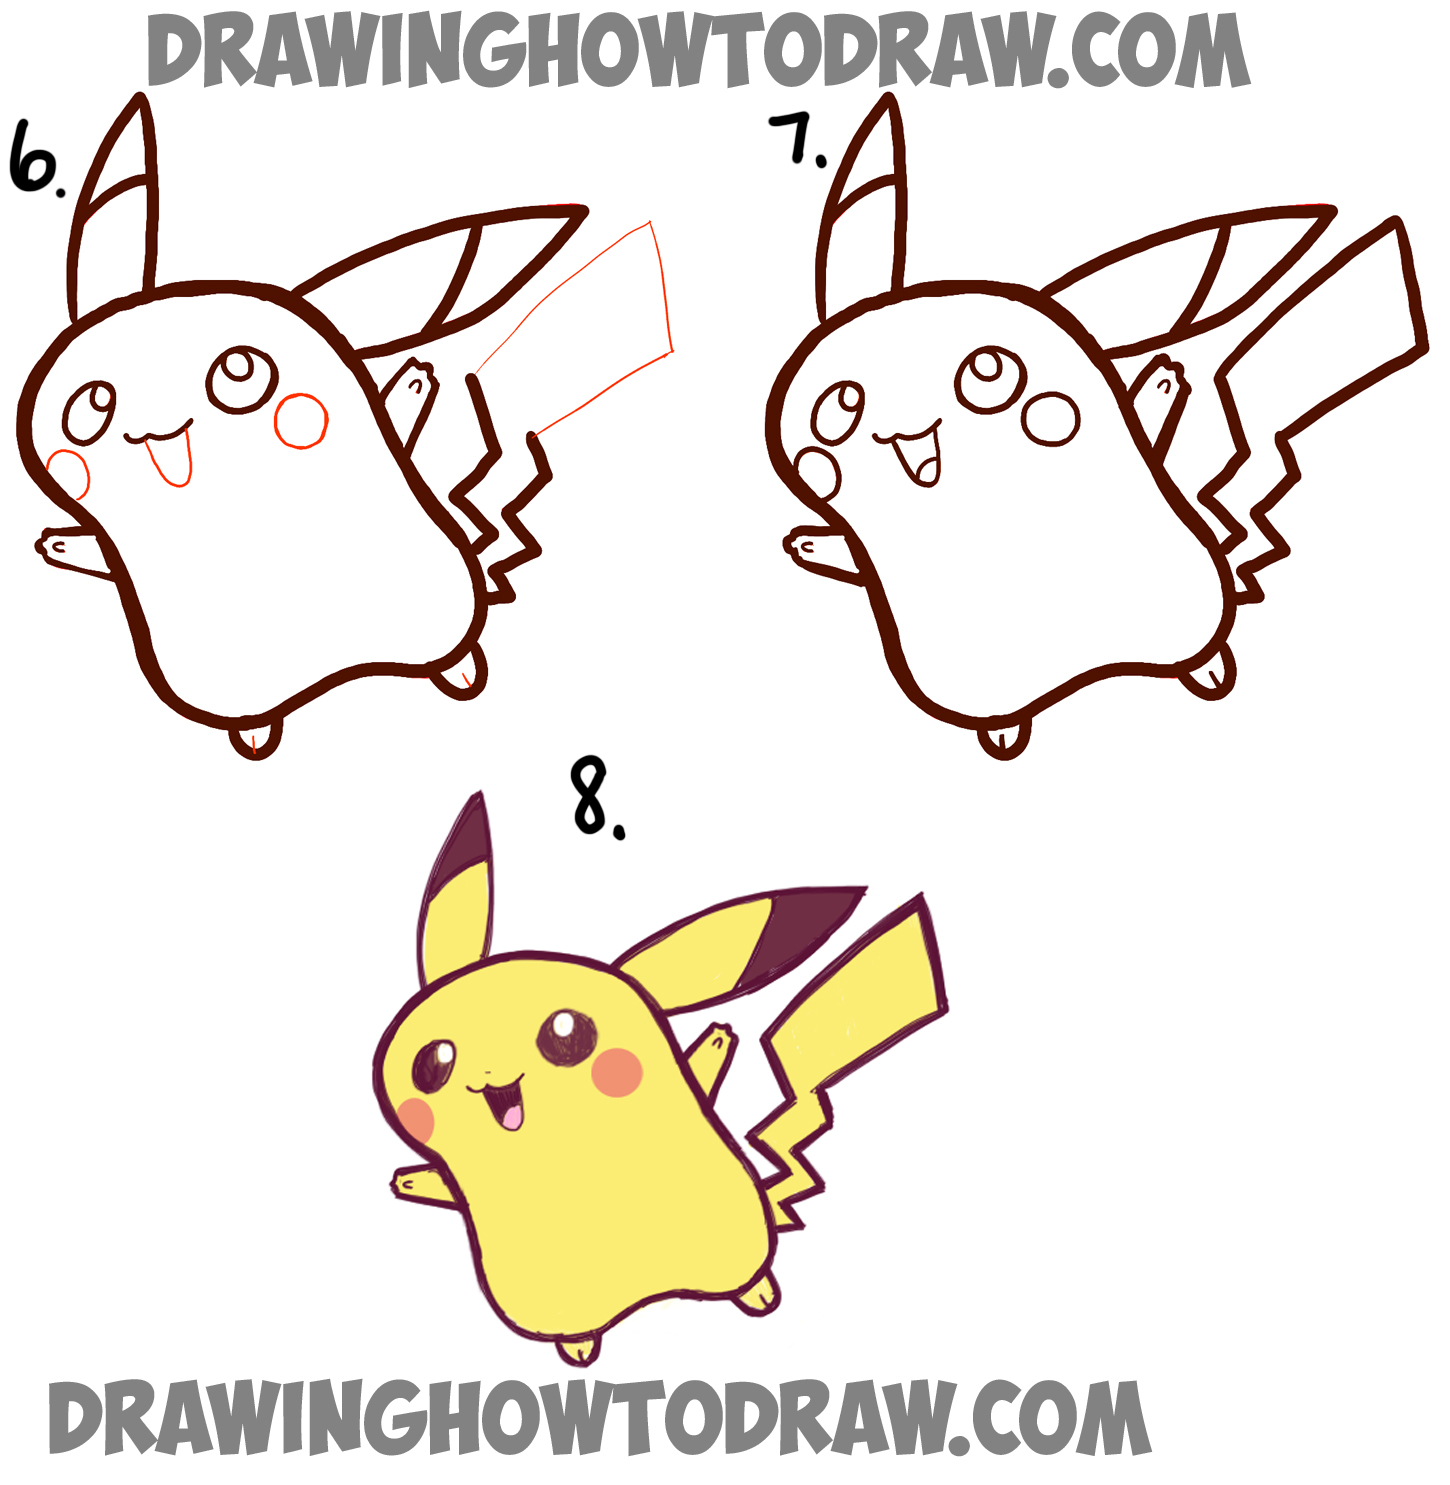 Easy Drawings | How to Draw Cute Pikachu | Color and Draw Step by Step -  YouTube